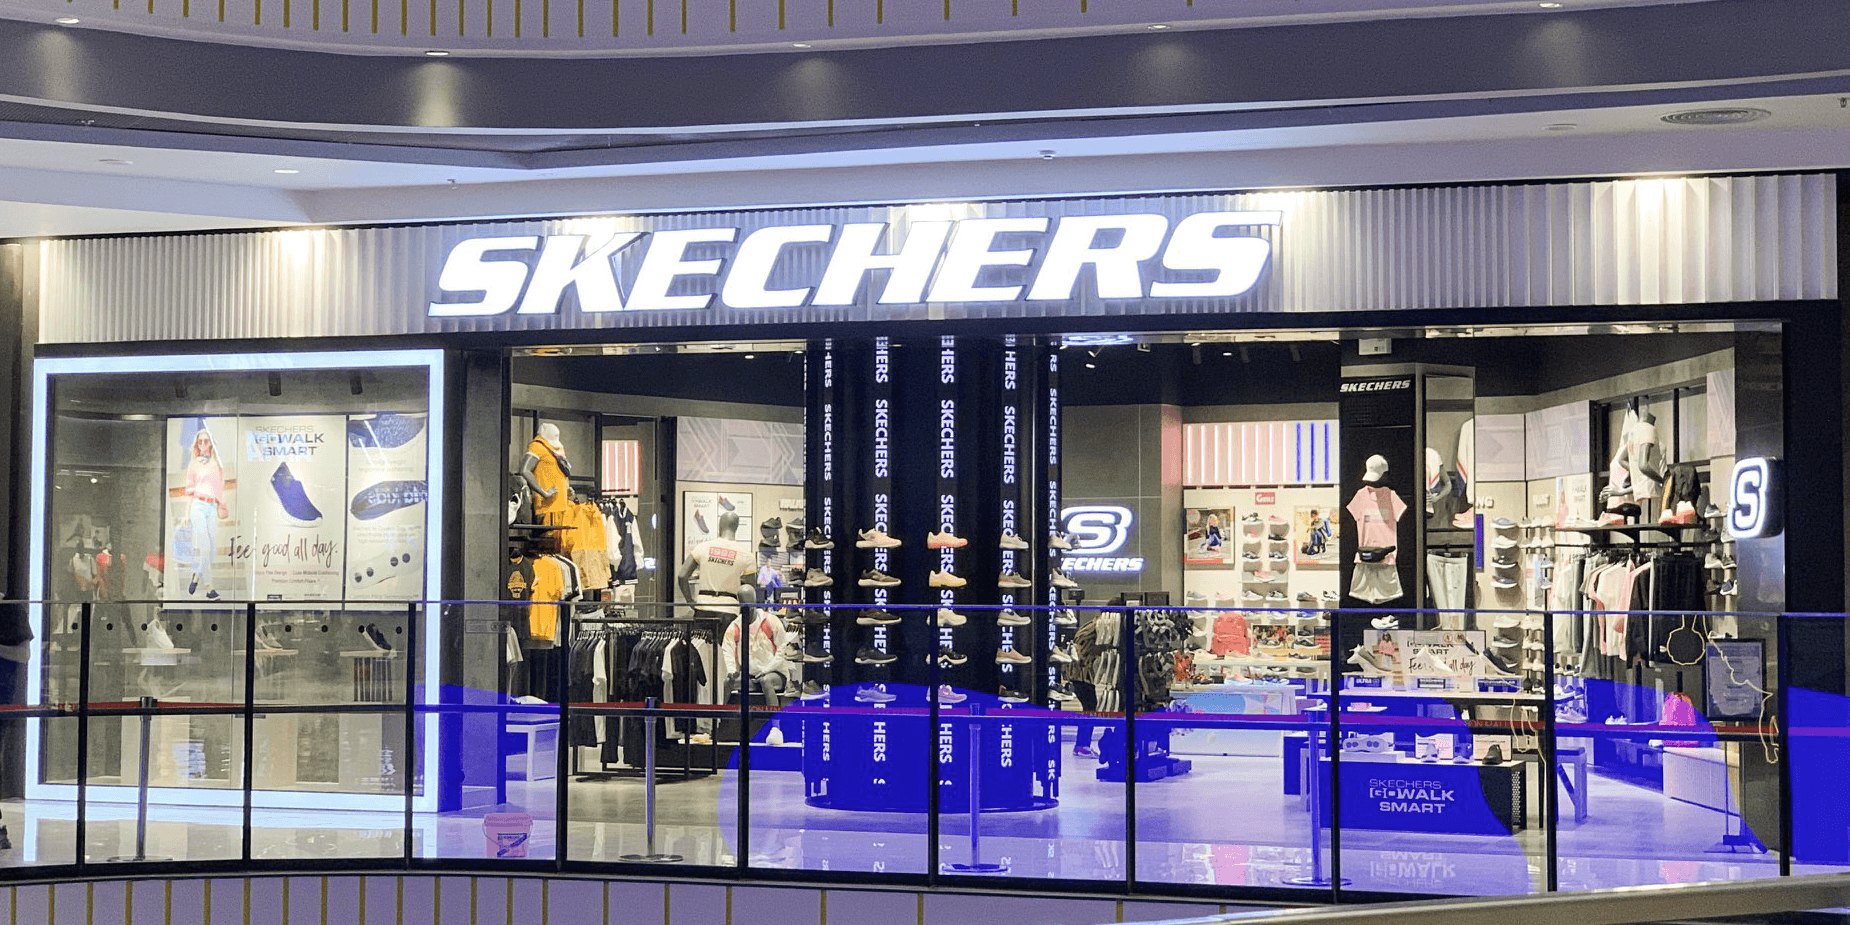 Skechers chose Retail software solutions